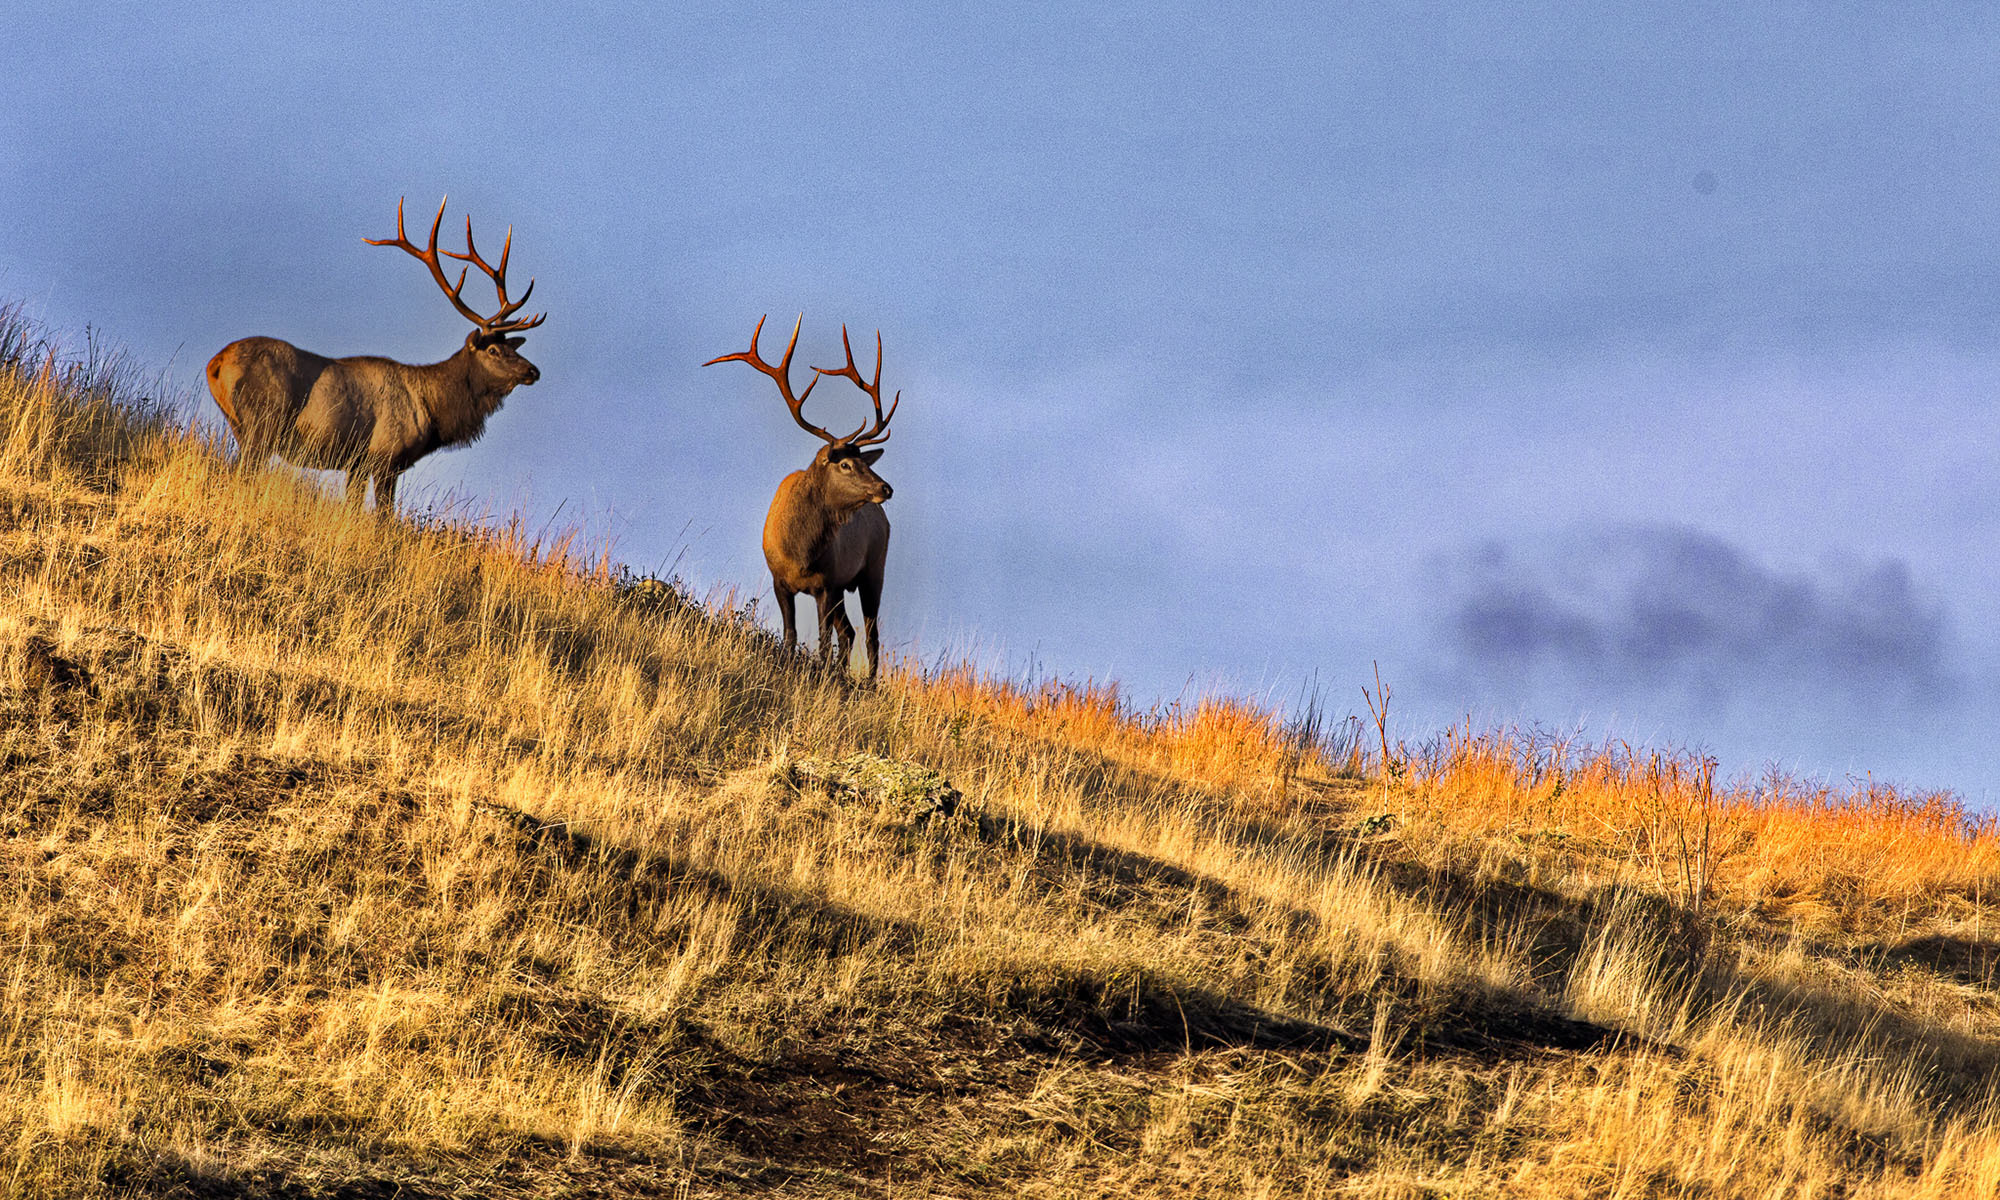 Two bull elk stand on a grassy hillside on the Flathead Indian Reservation.